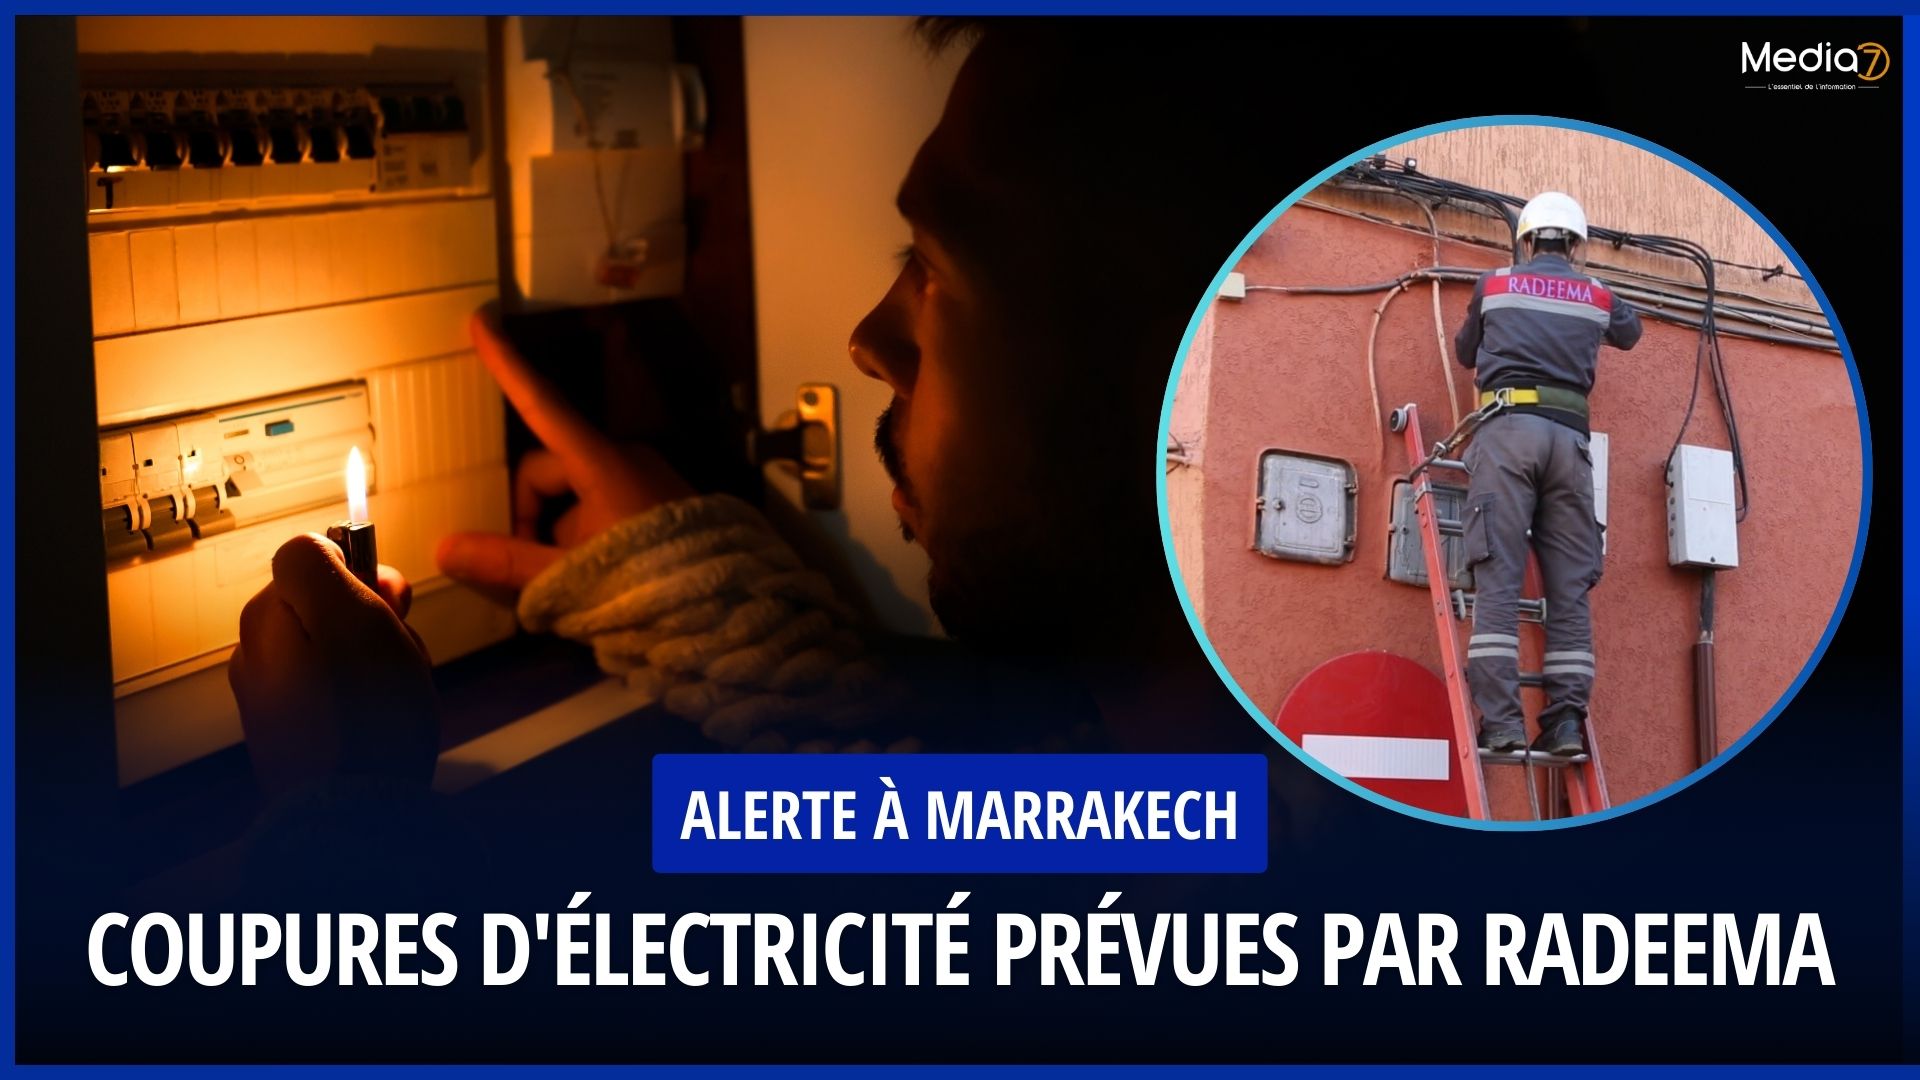 Electricity Cuts Planned in Marrakech: Here are the Affected Neighborhoods